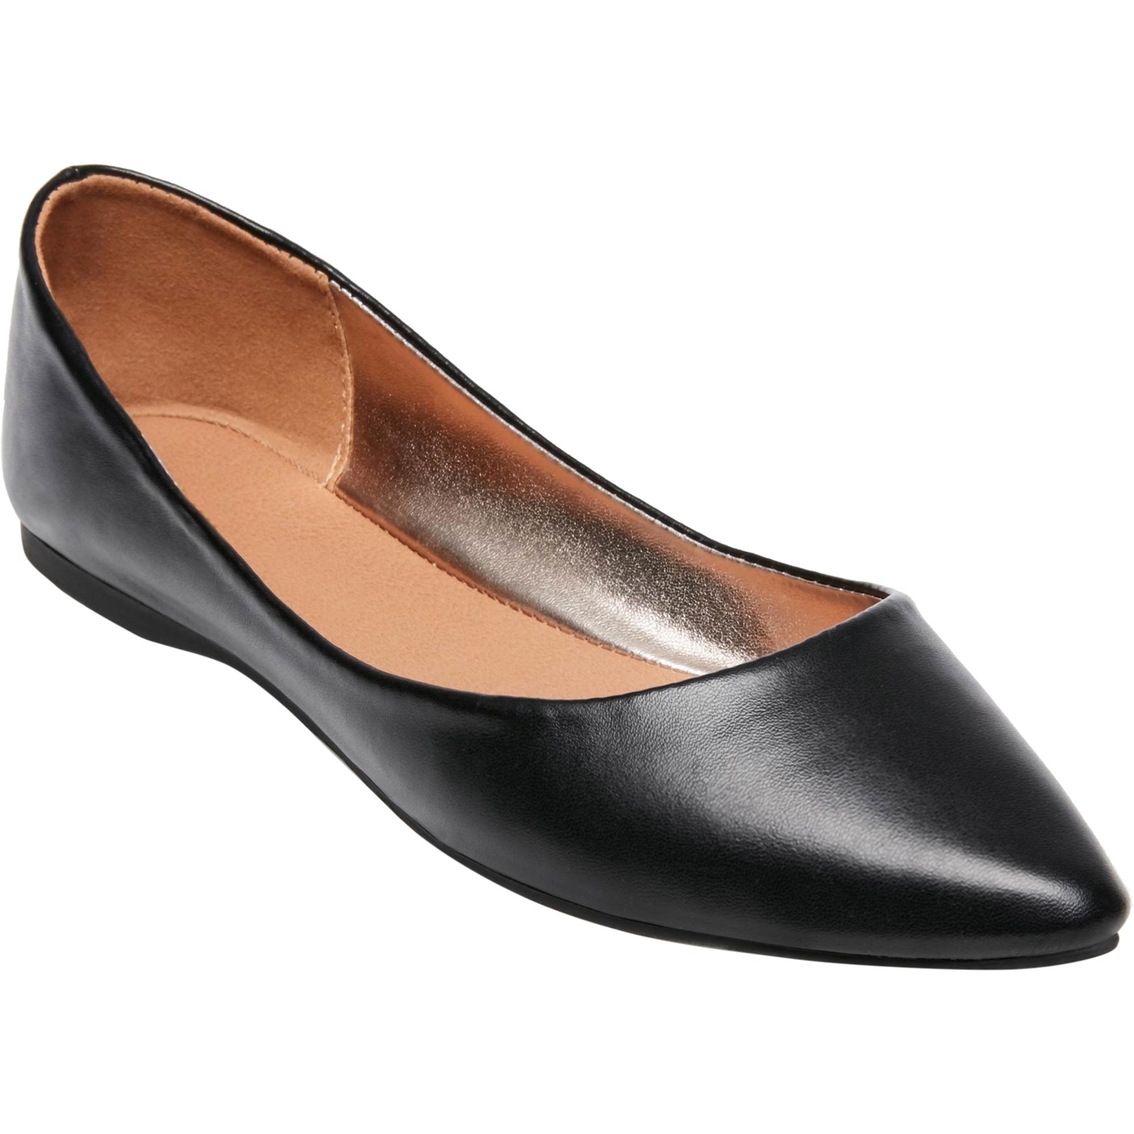 madden girl pointed flats